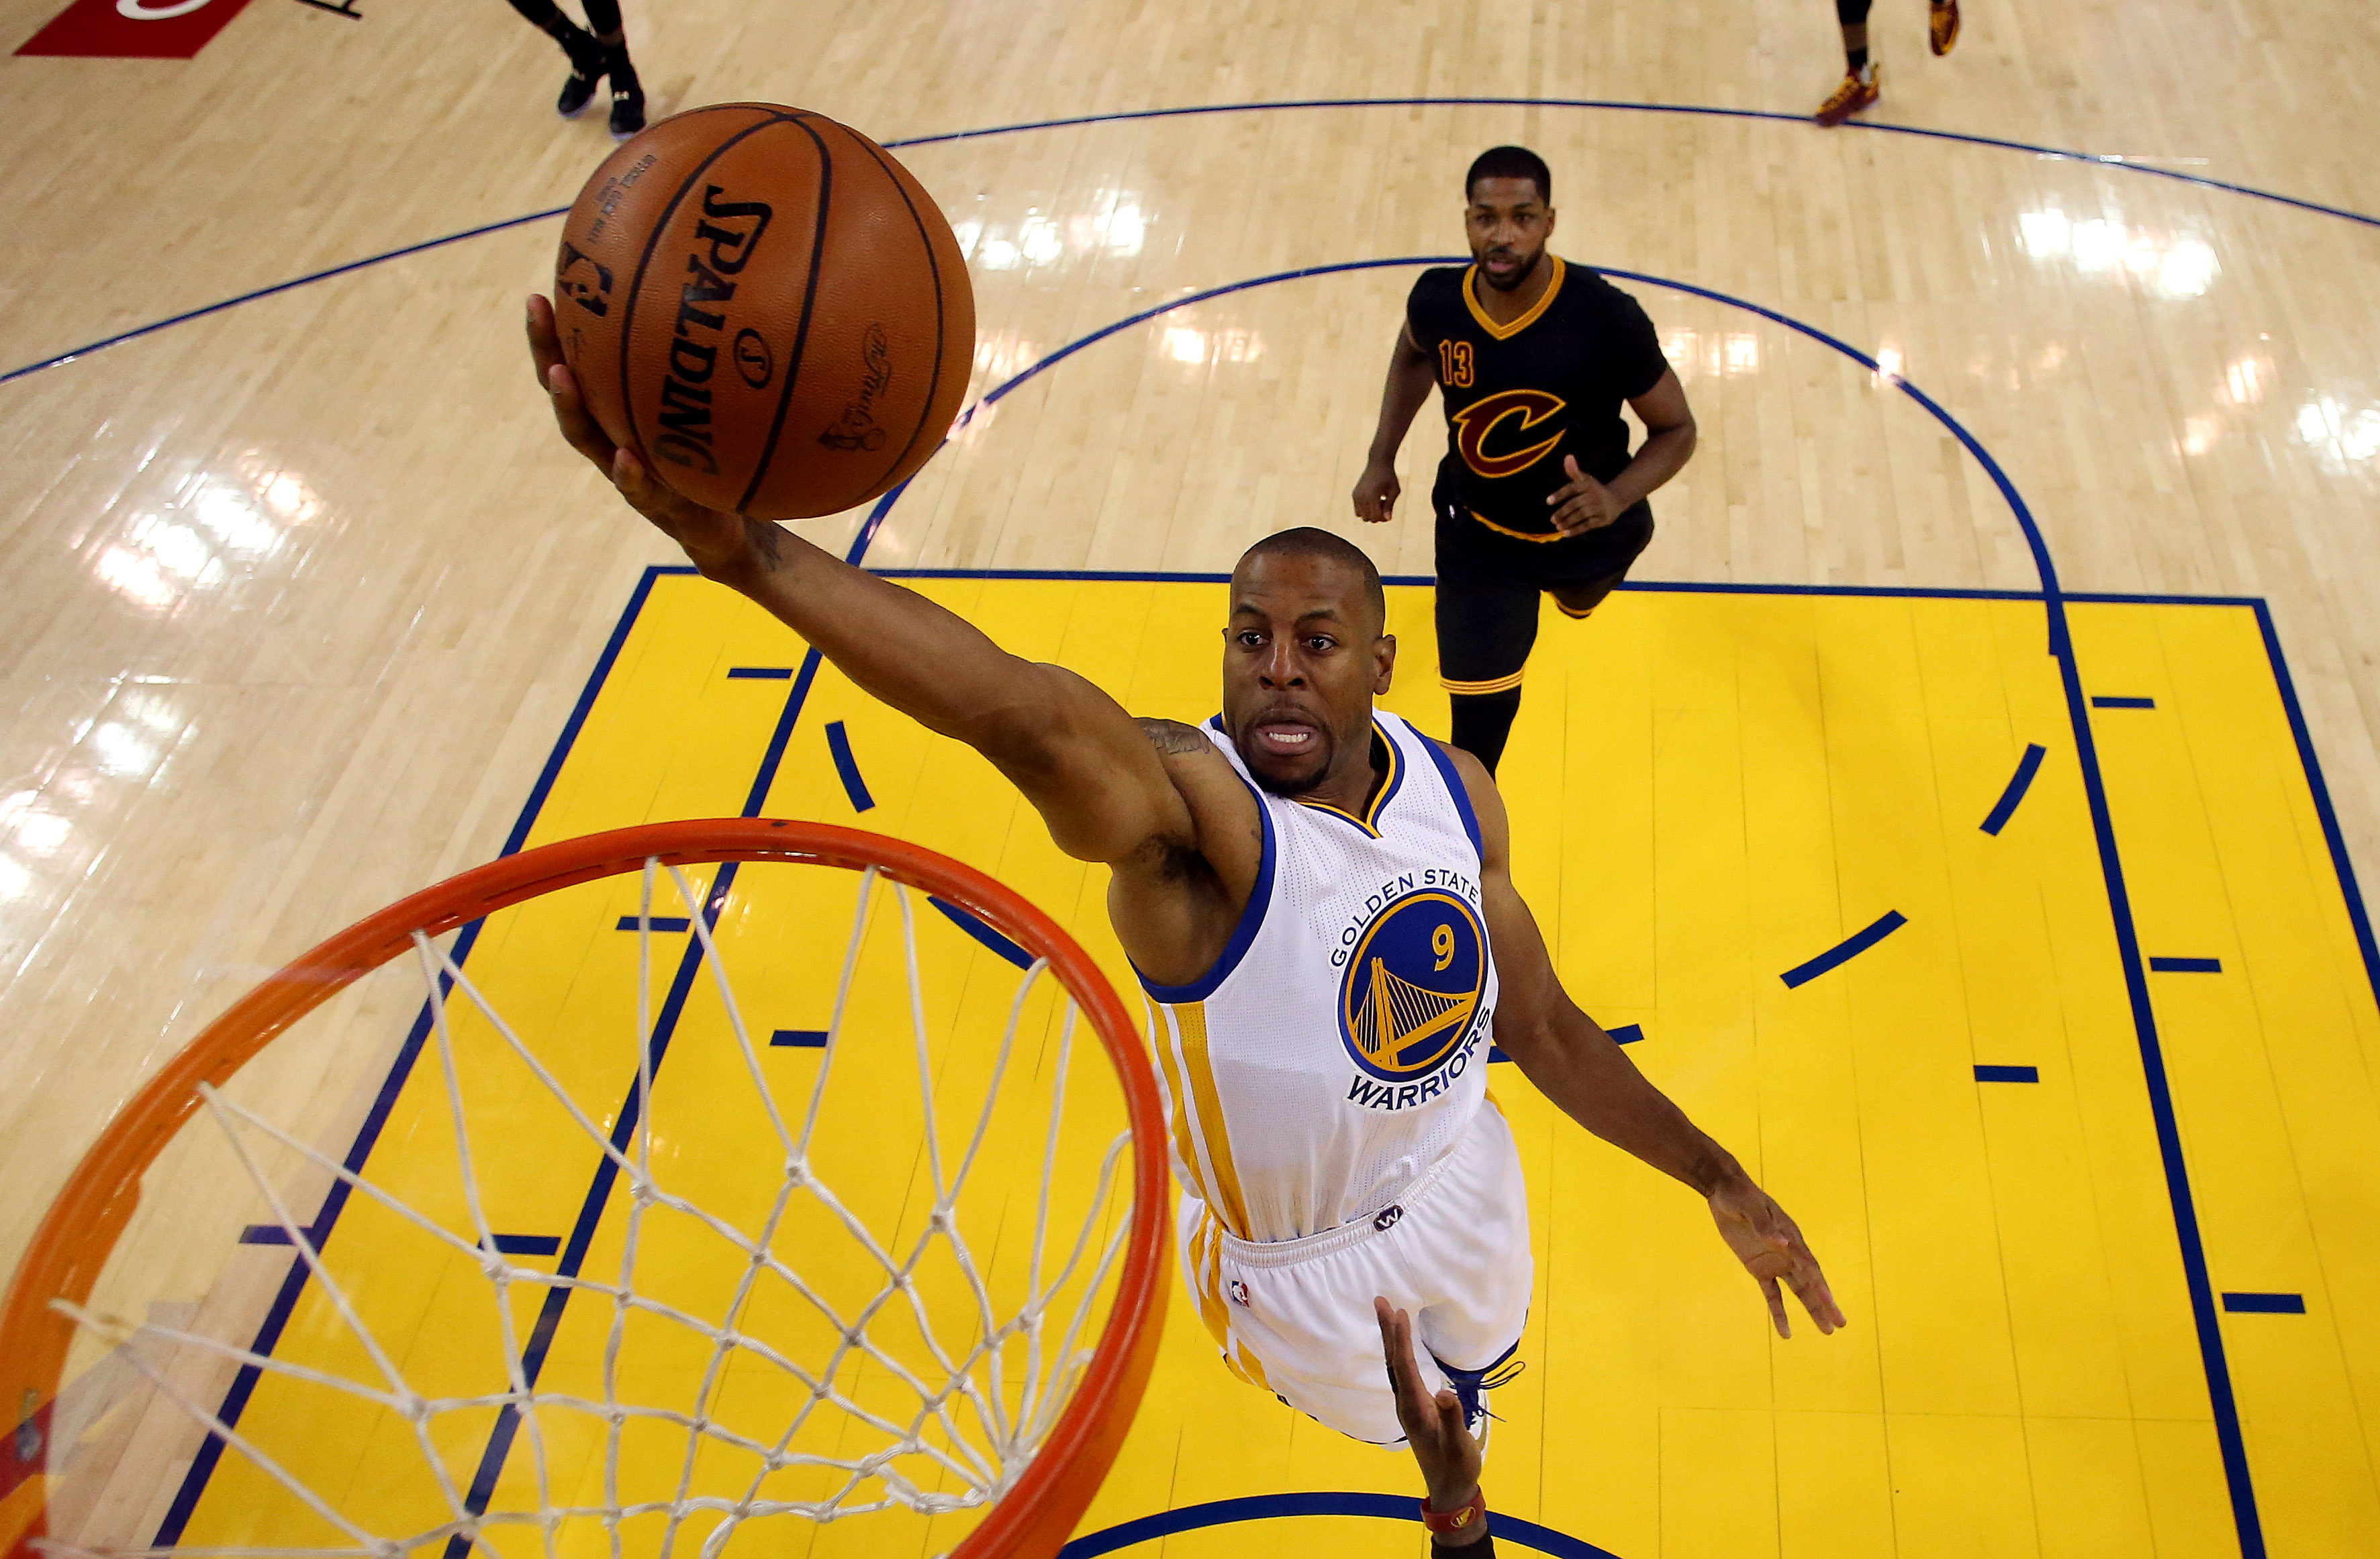 Andre Iguodala soars to the rim ahead of the pack.